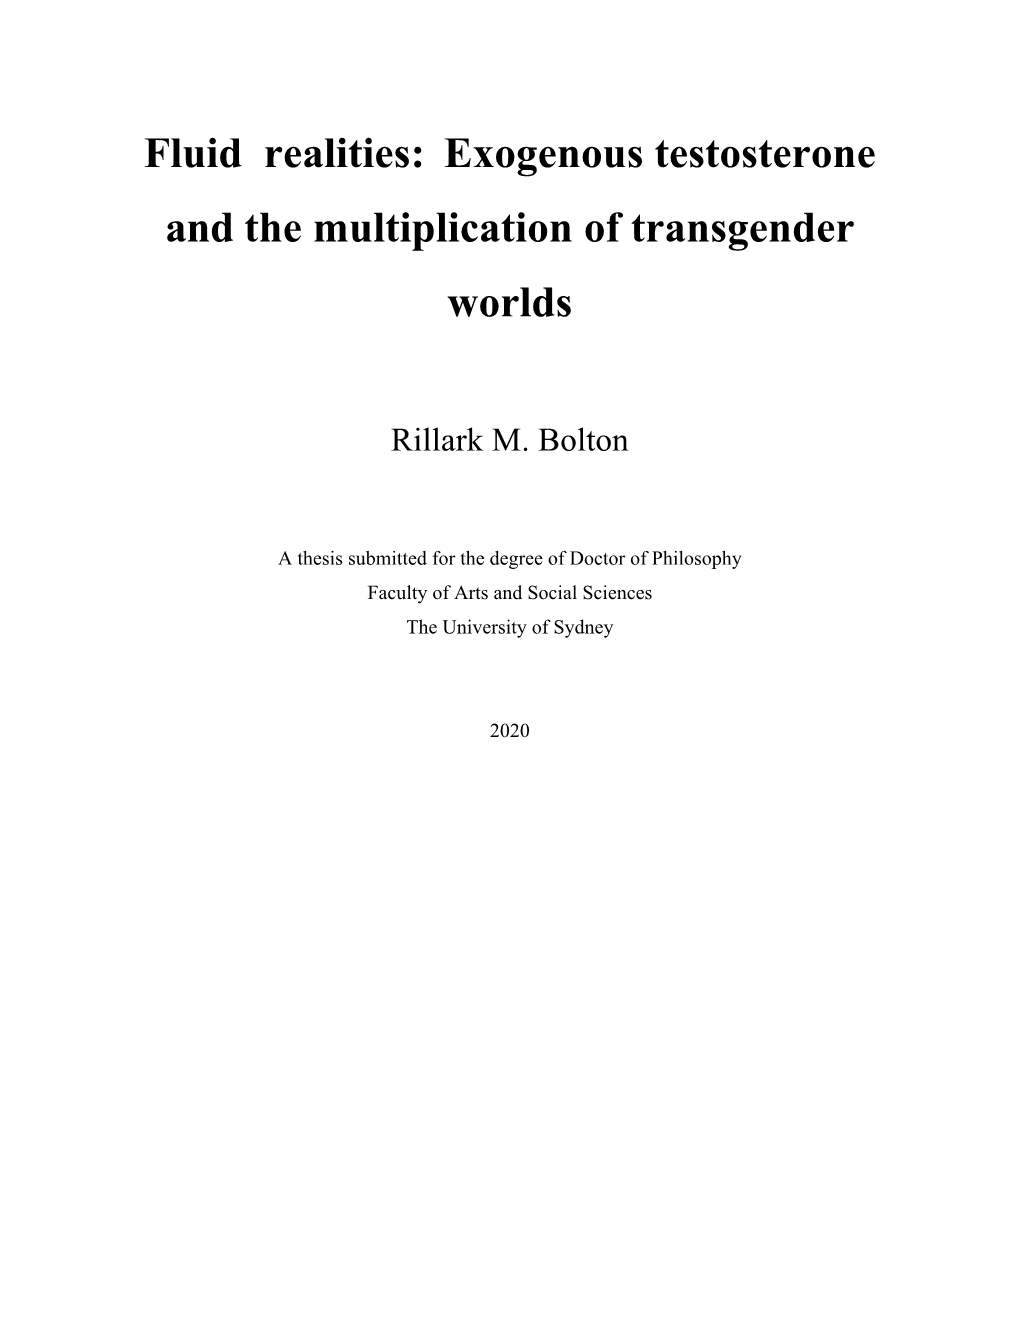 Exogenous Testosterone and the Multiplication of Transgender Worlds